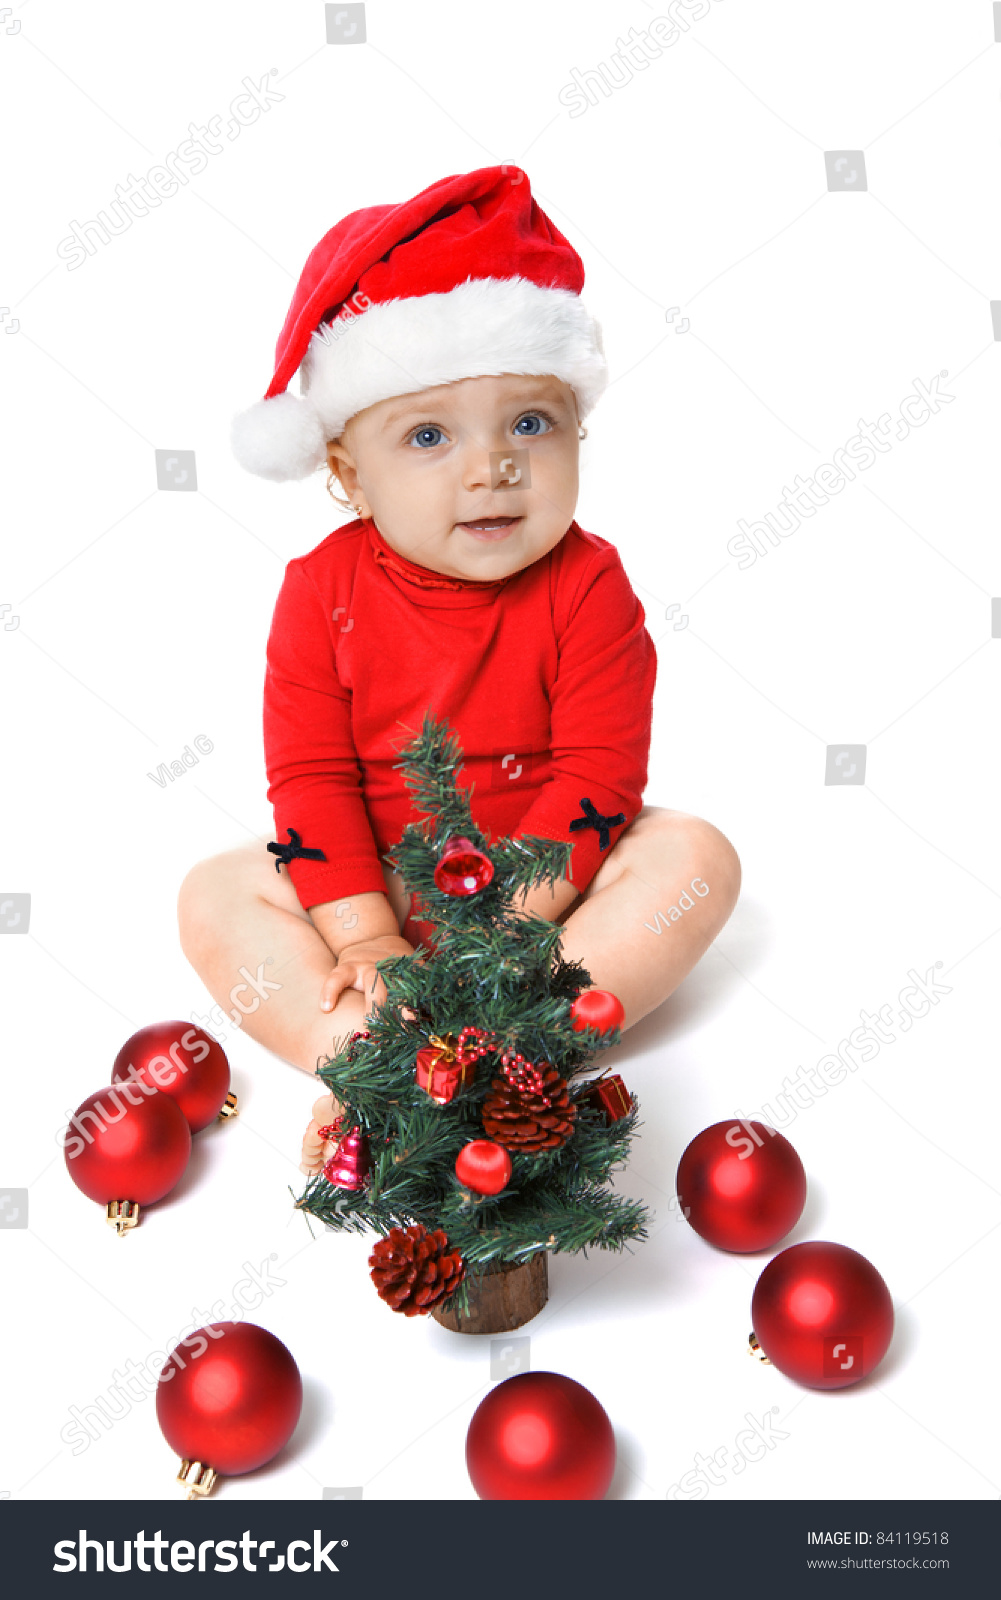 Baby Girl Wearing A Santa Claus Hat, Playing With Red Balls, Near The ...